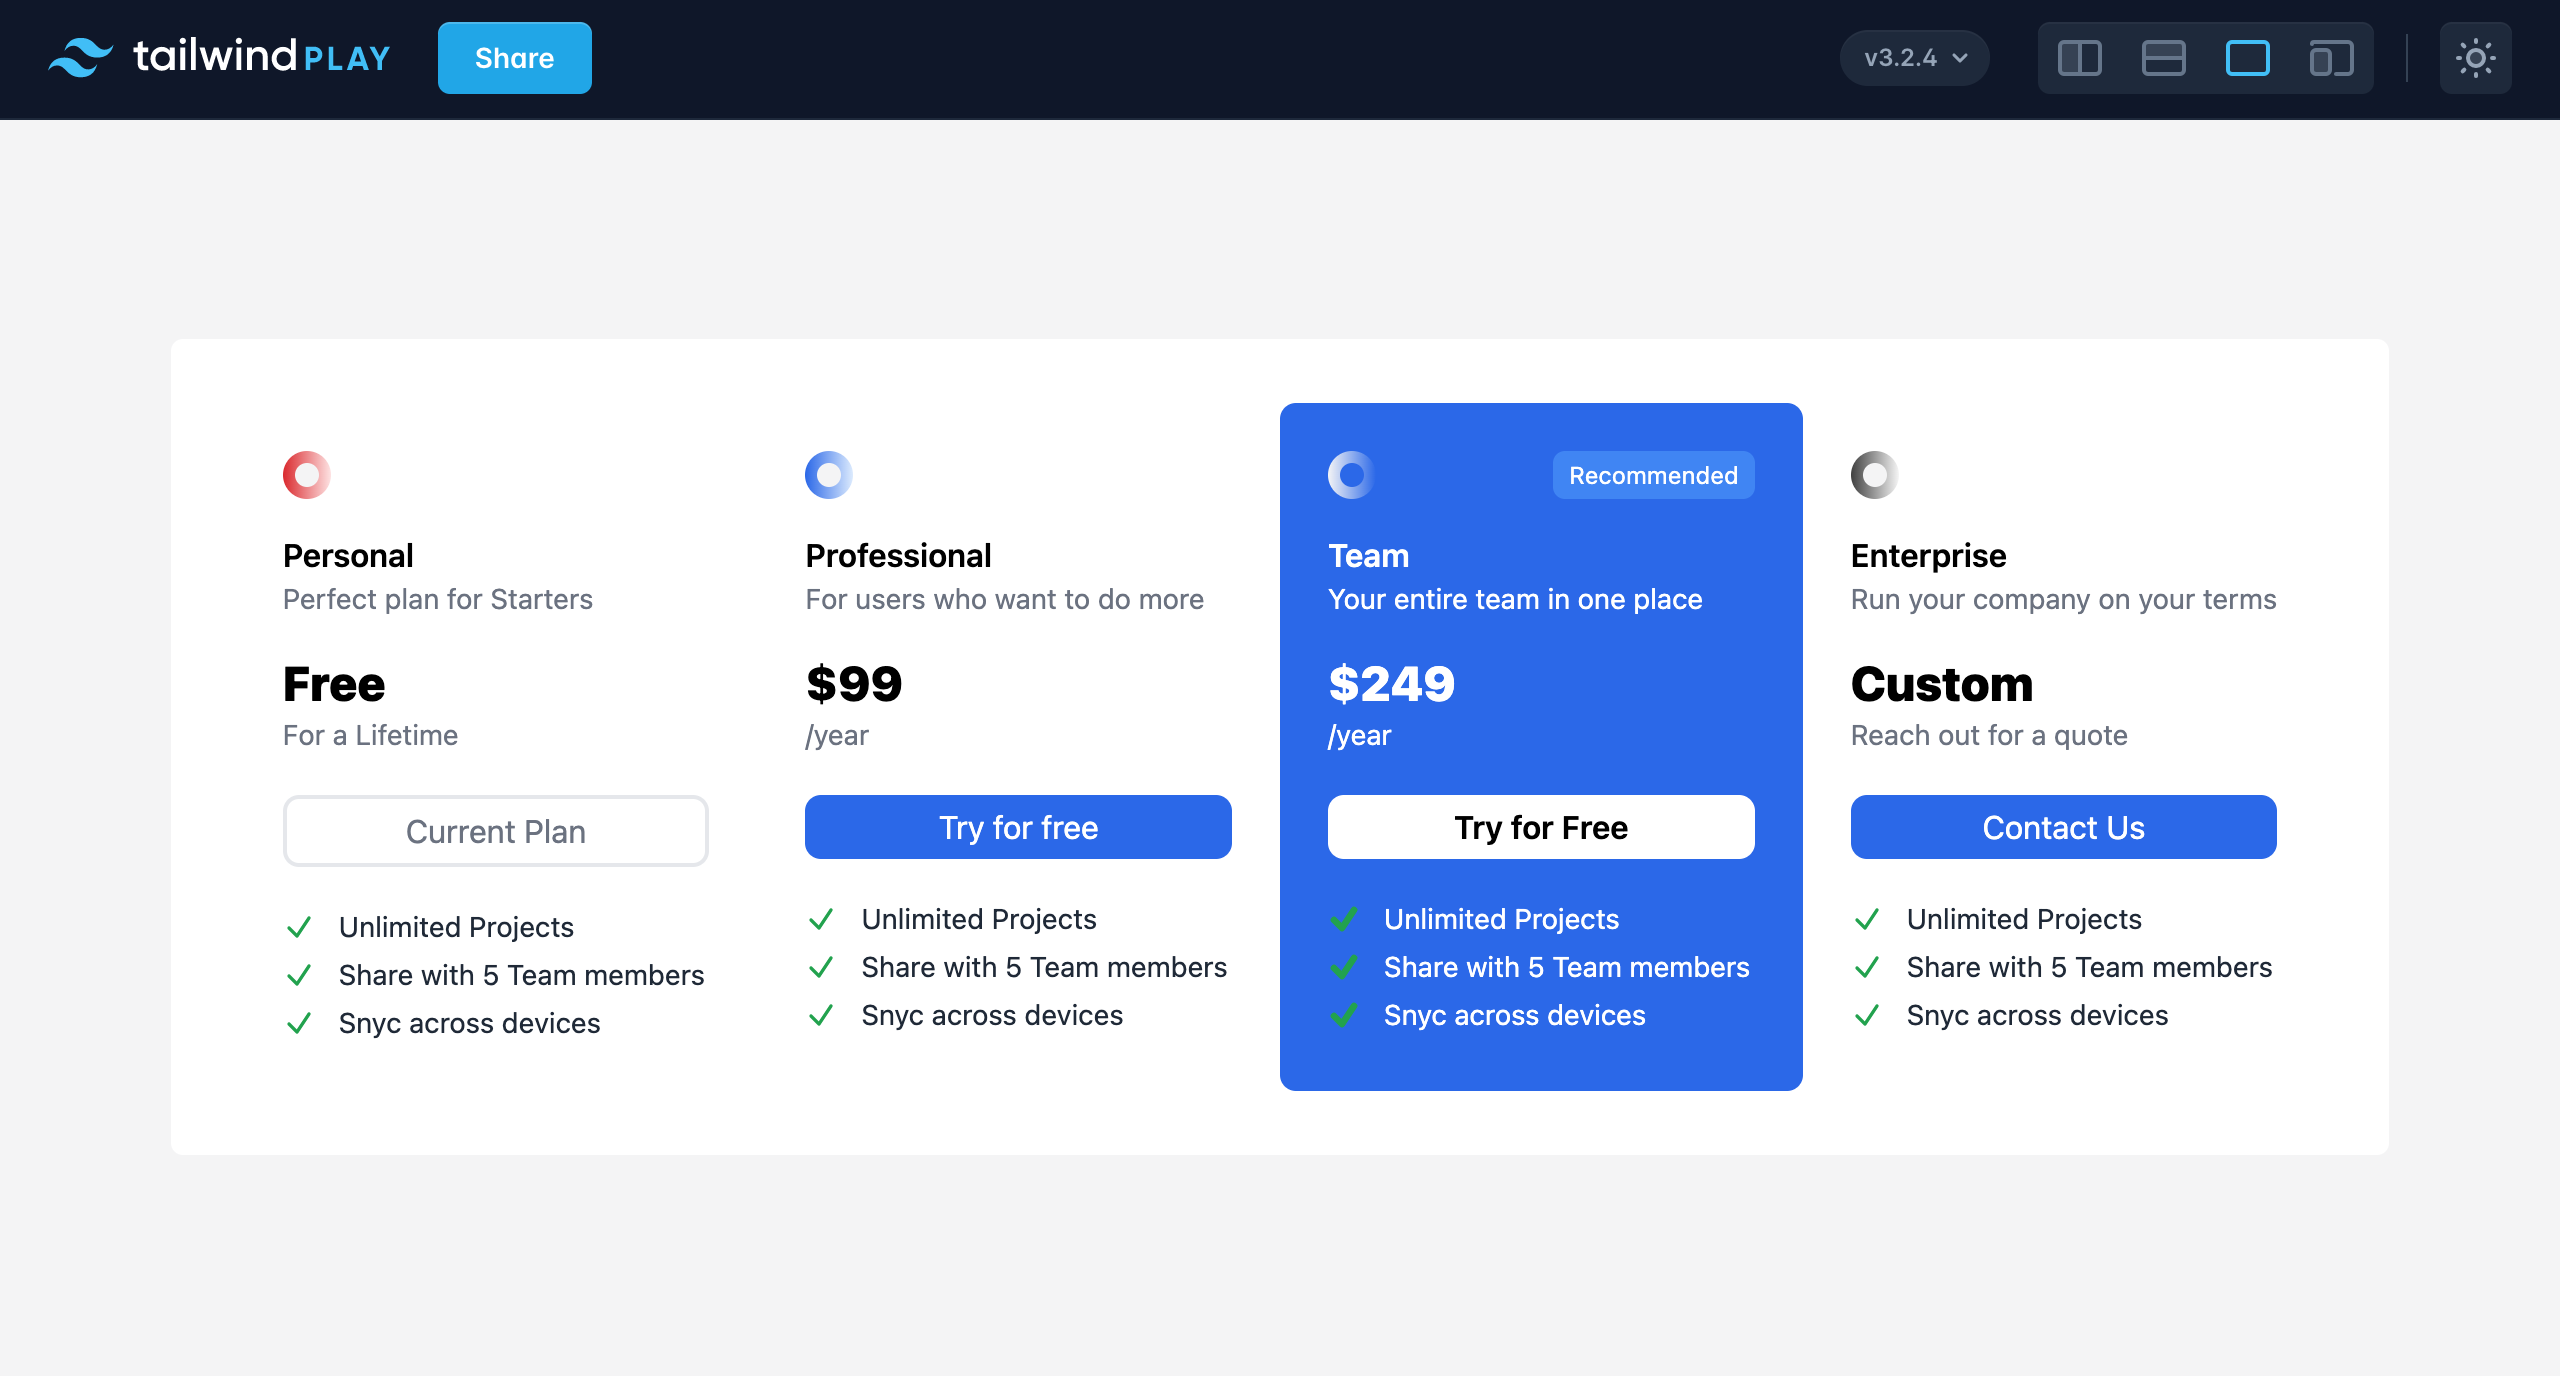 Responsive Pricing Table made using Tailwind CSS